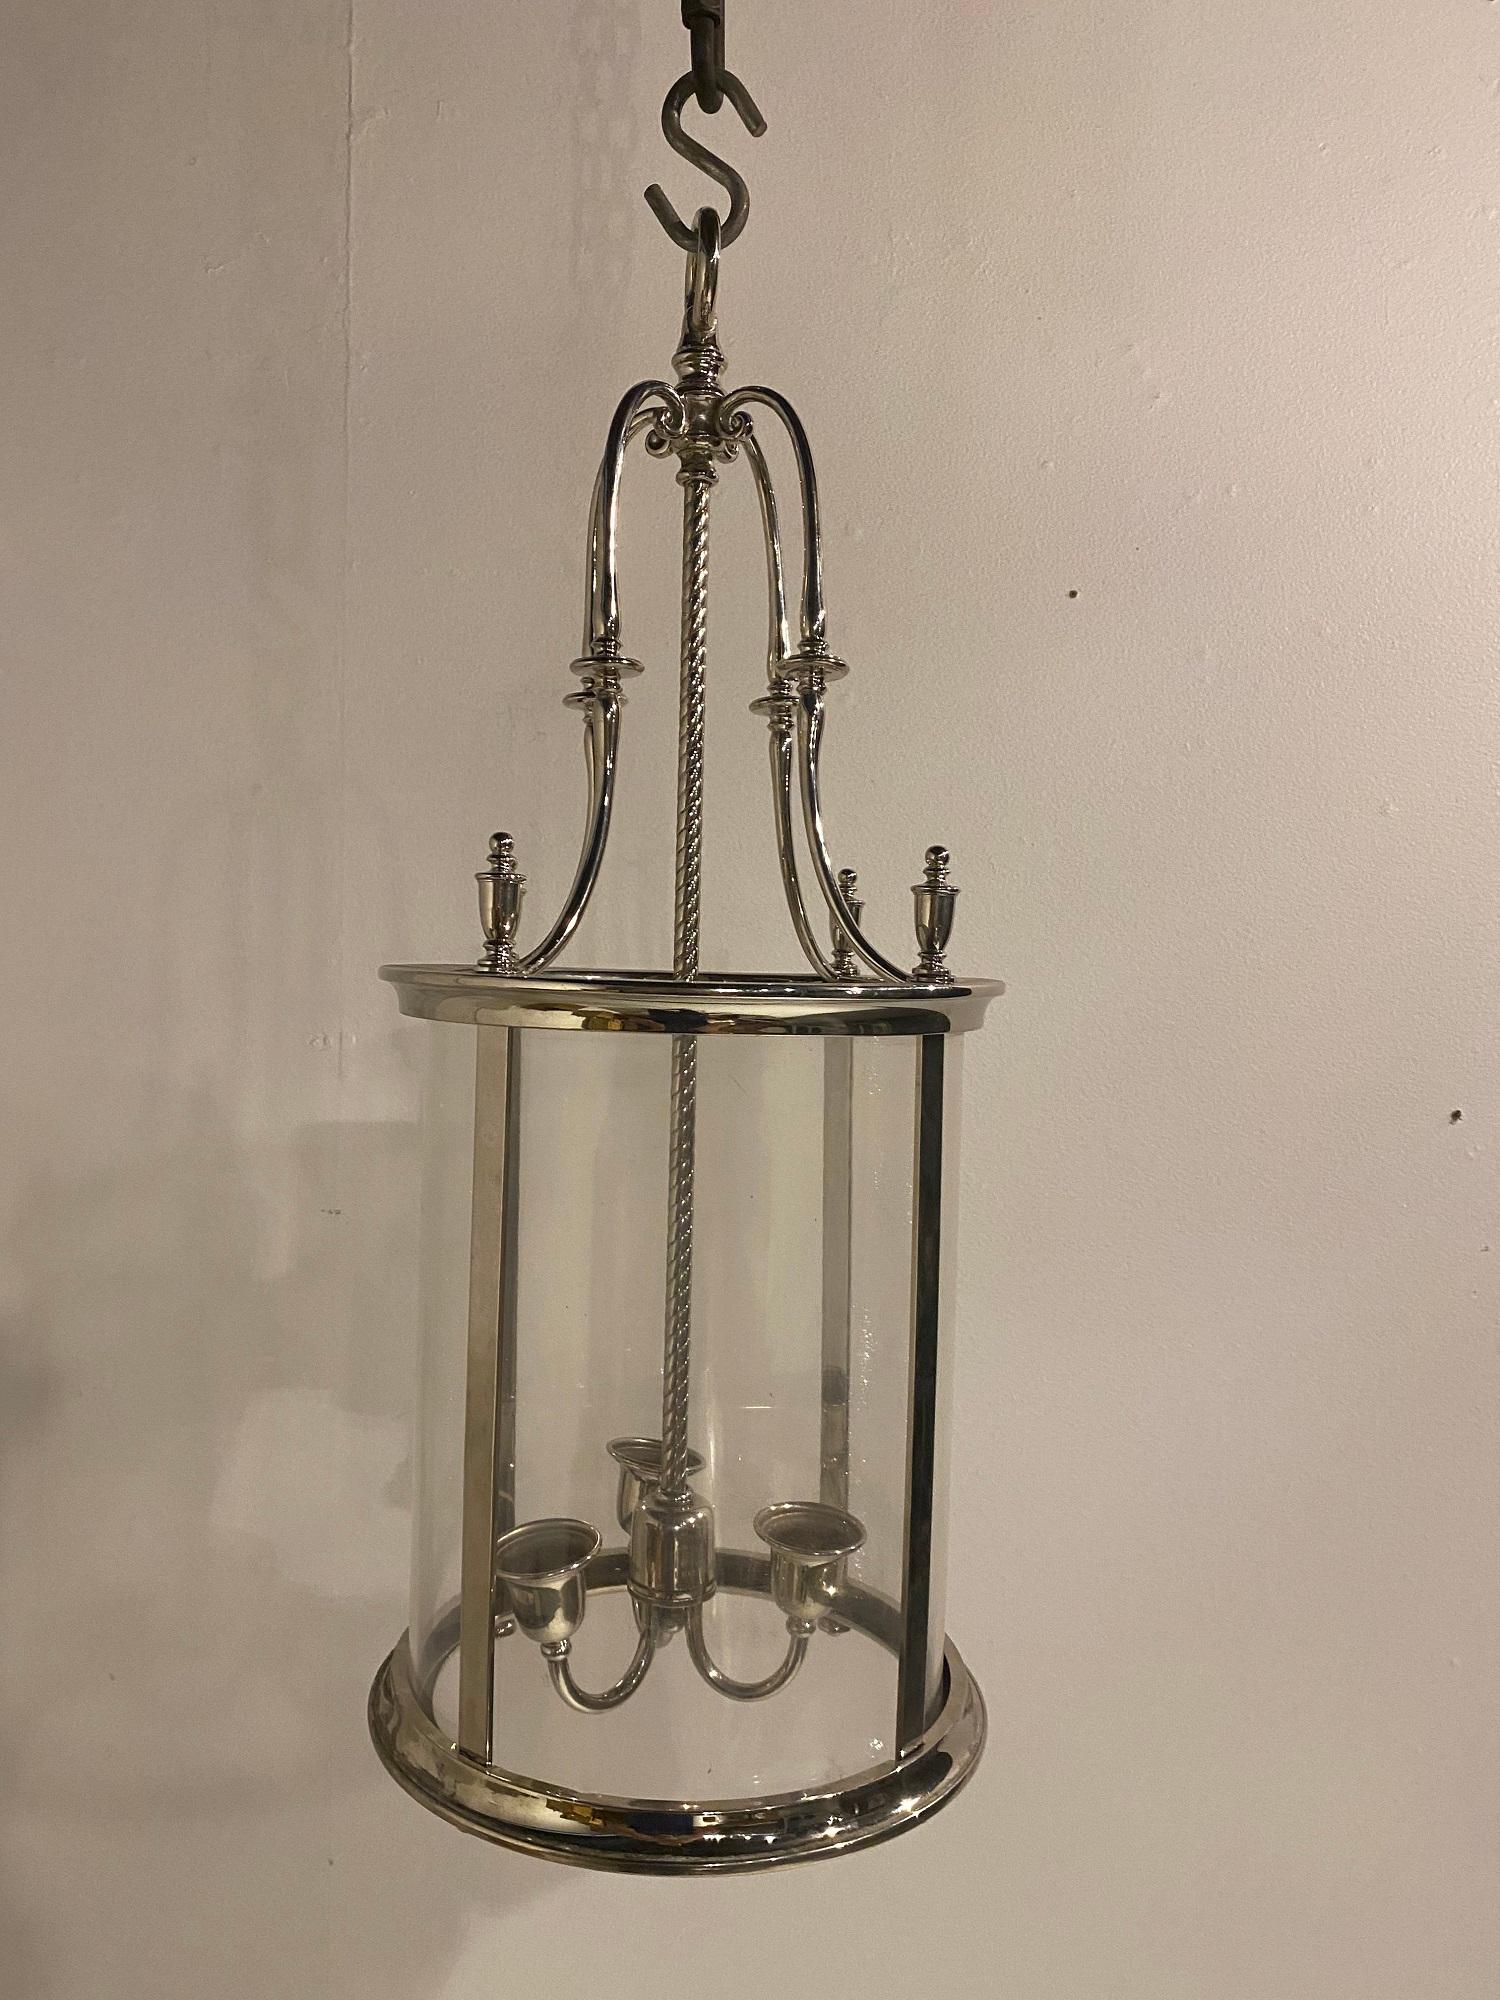 A 1920’s English silver plated lantern with interior lights